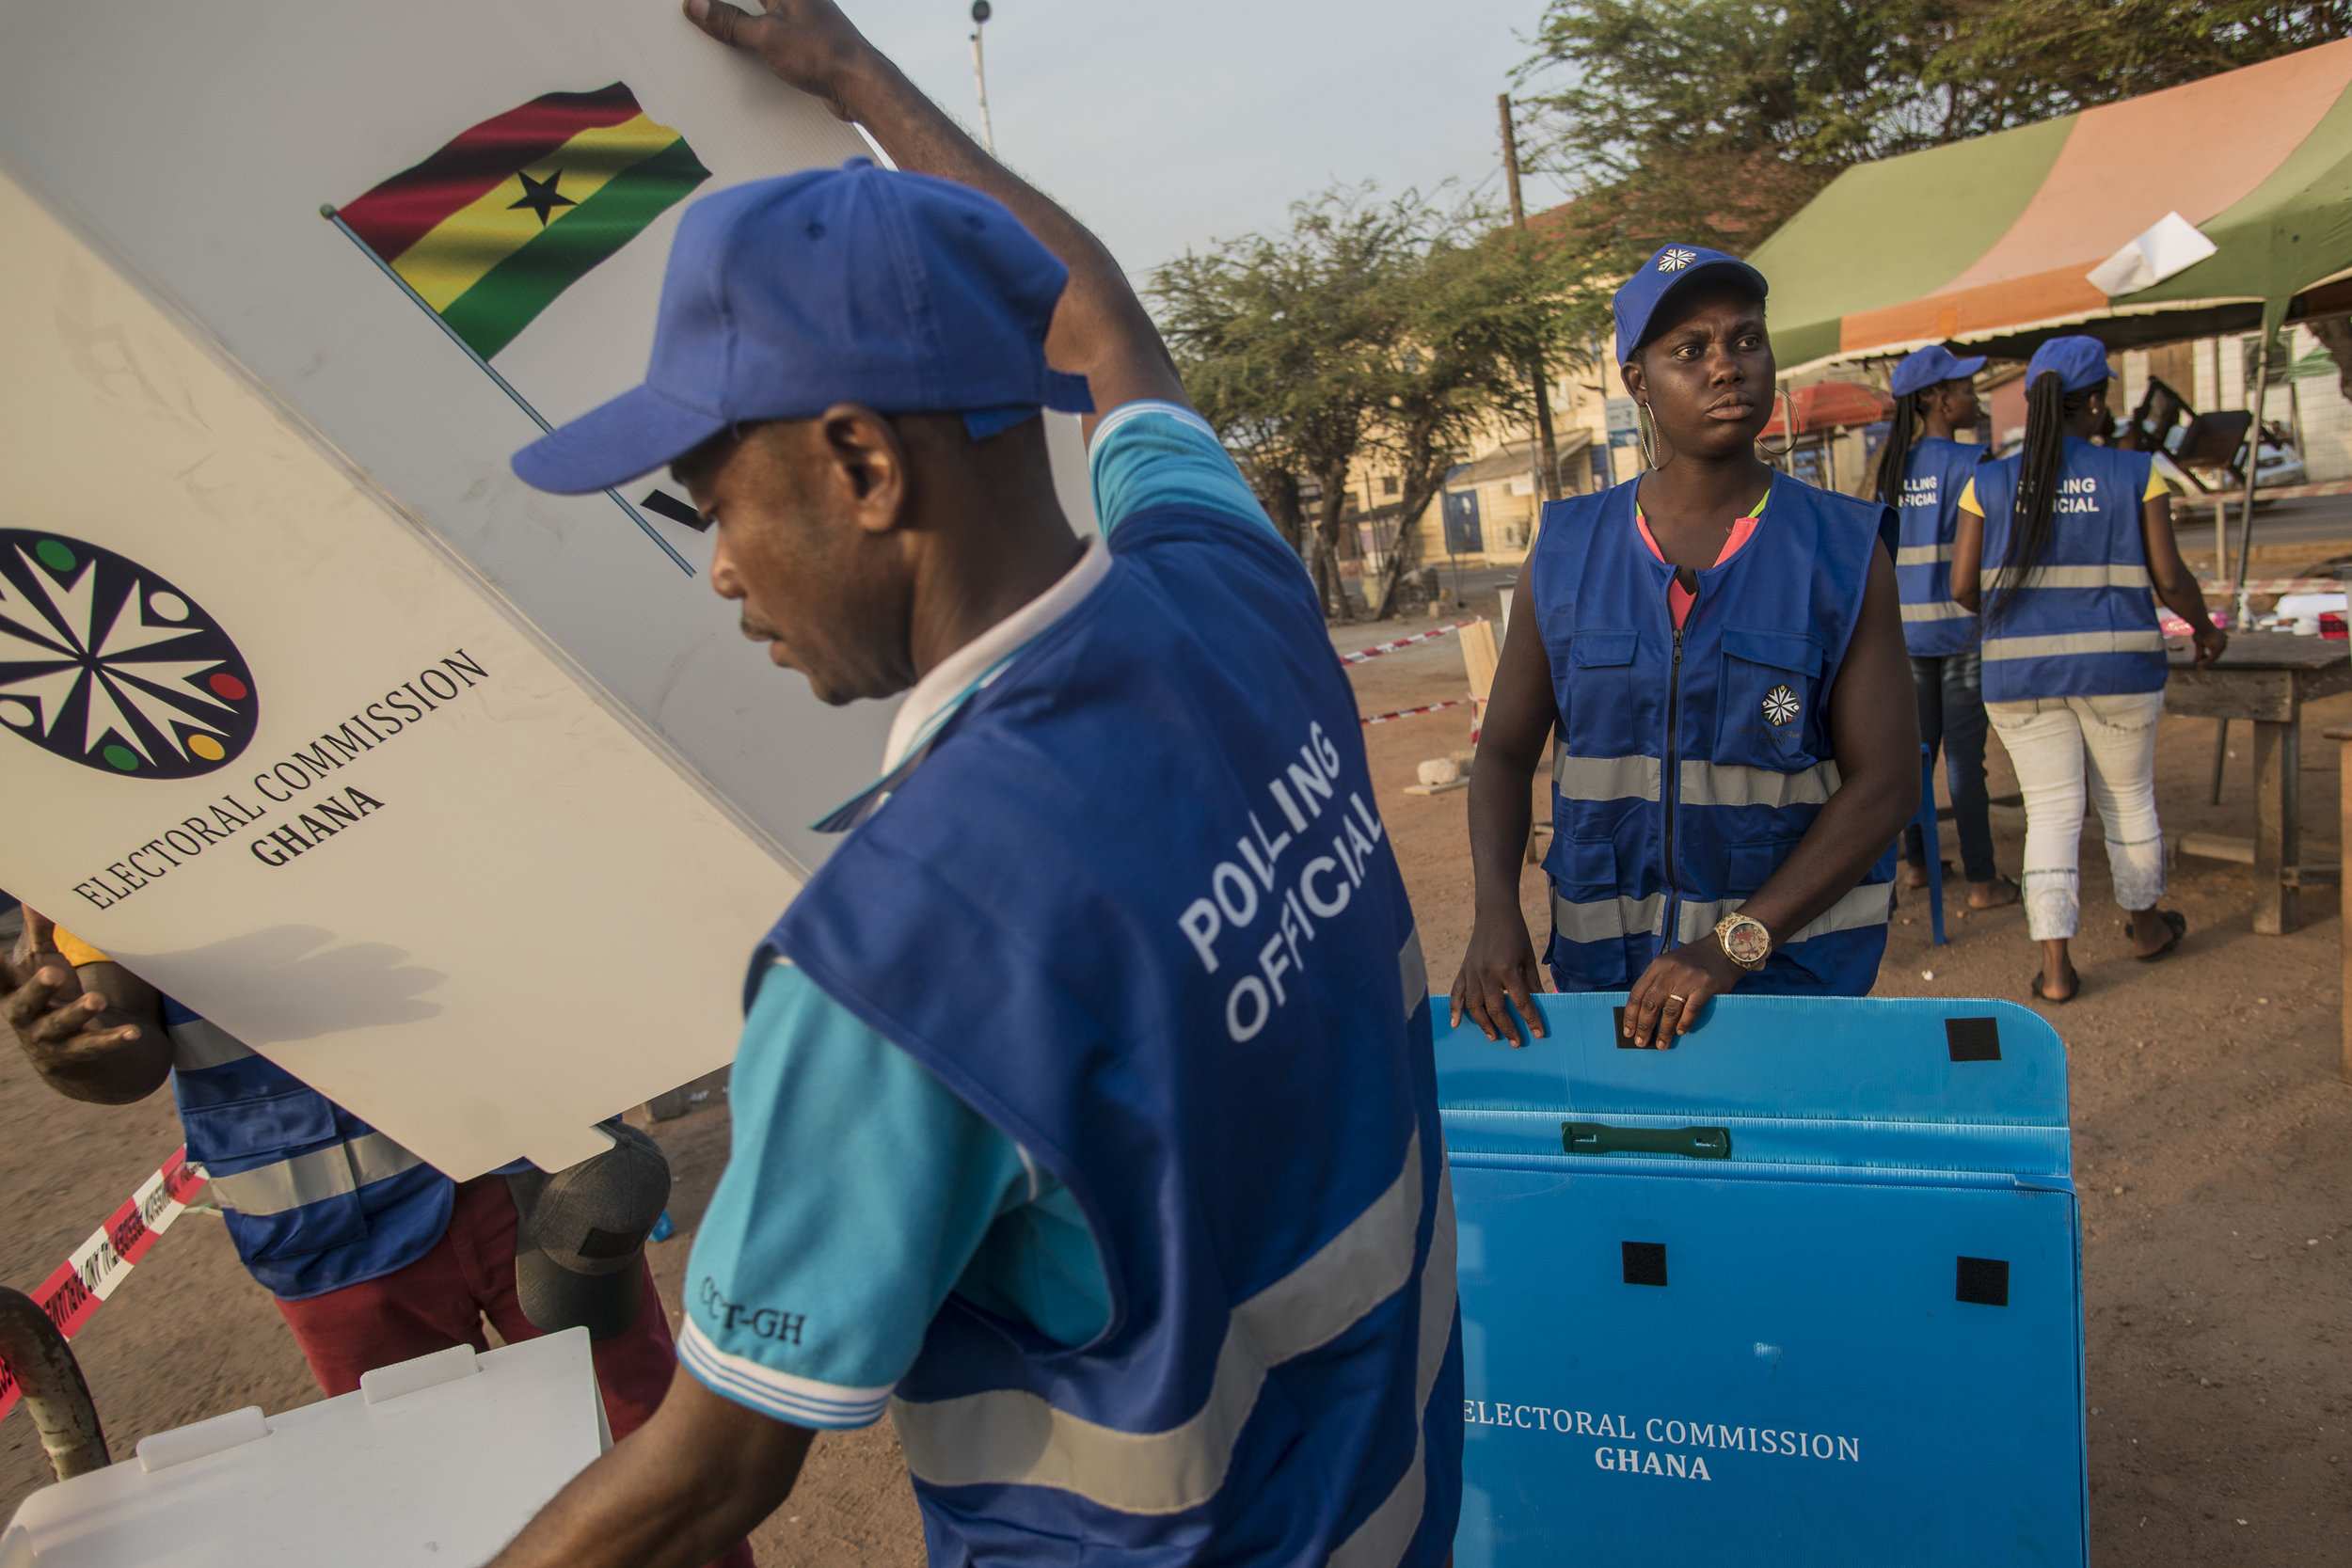  Polling officials preparing a polling station in James Town Accra during Ghana's General Election voting day&nbsp; 